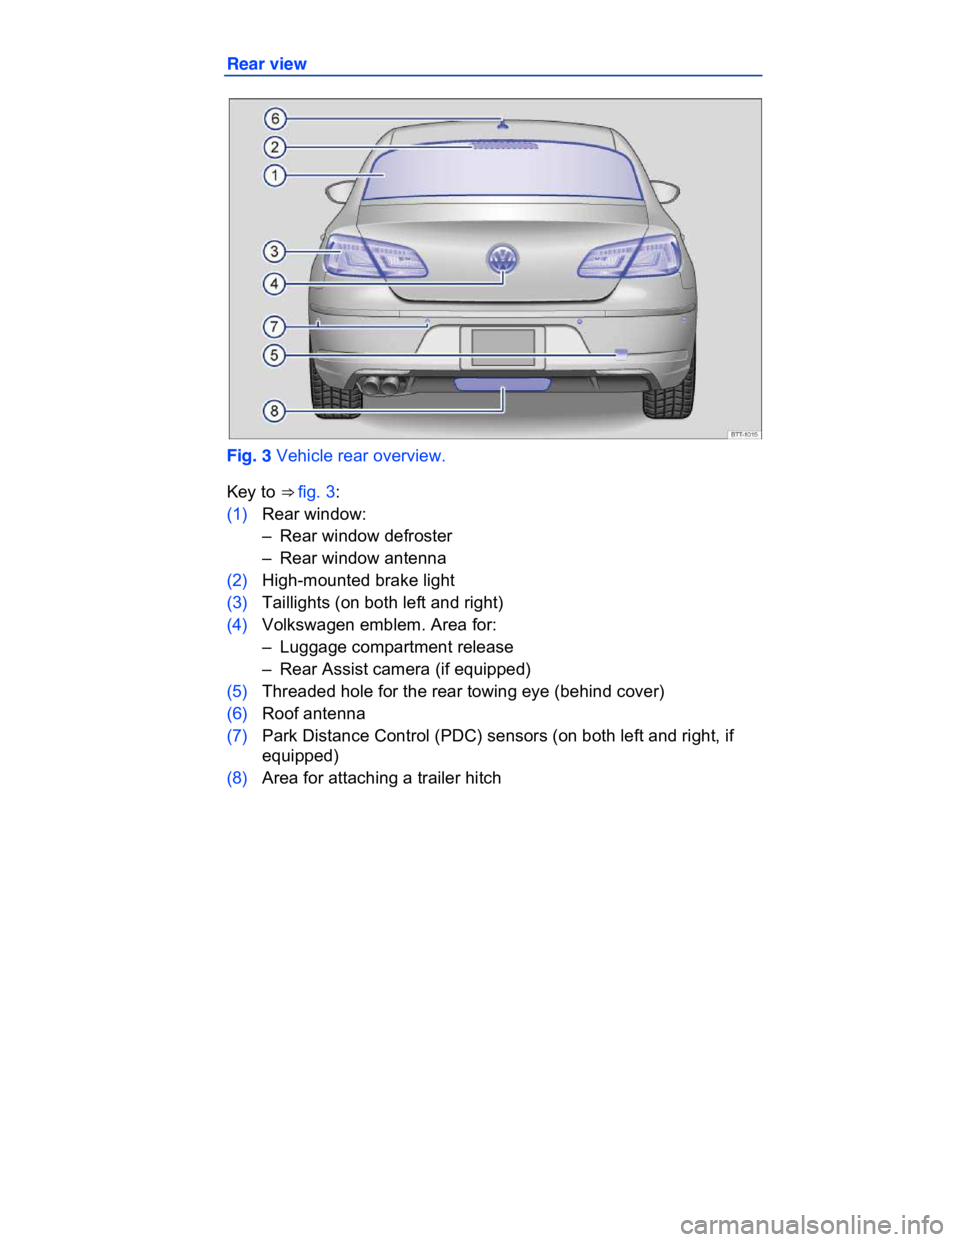 VOLKSWAGEN CC 2008  Owners Manual  
Rear view 
 
Fig. 3 Vehicle rear overview. 
Key to ⇒ fig. 3: 
(1) Rear window: 
–  Rear window defroster  
–  Rear window antenna  
(2) High-mounted brake light 
(3) Taillights (on both left